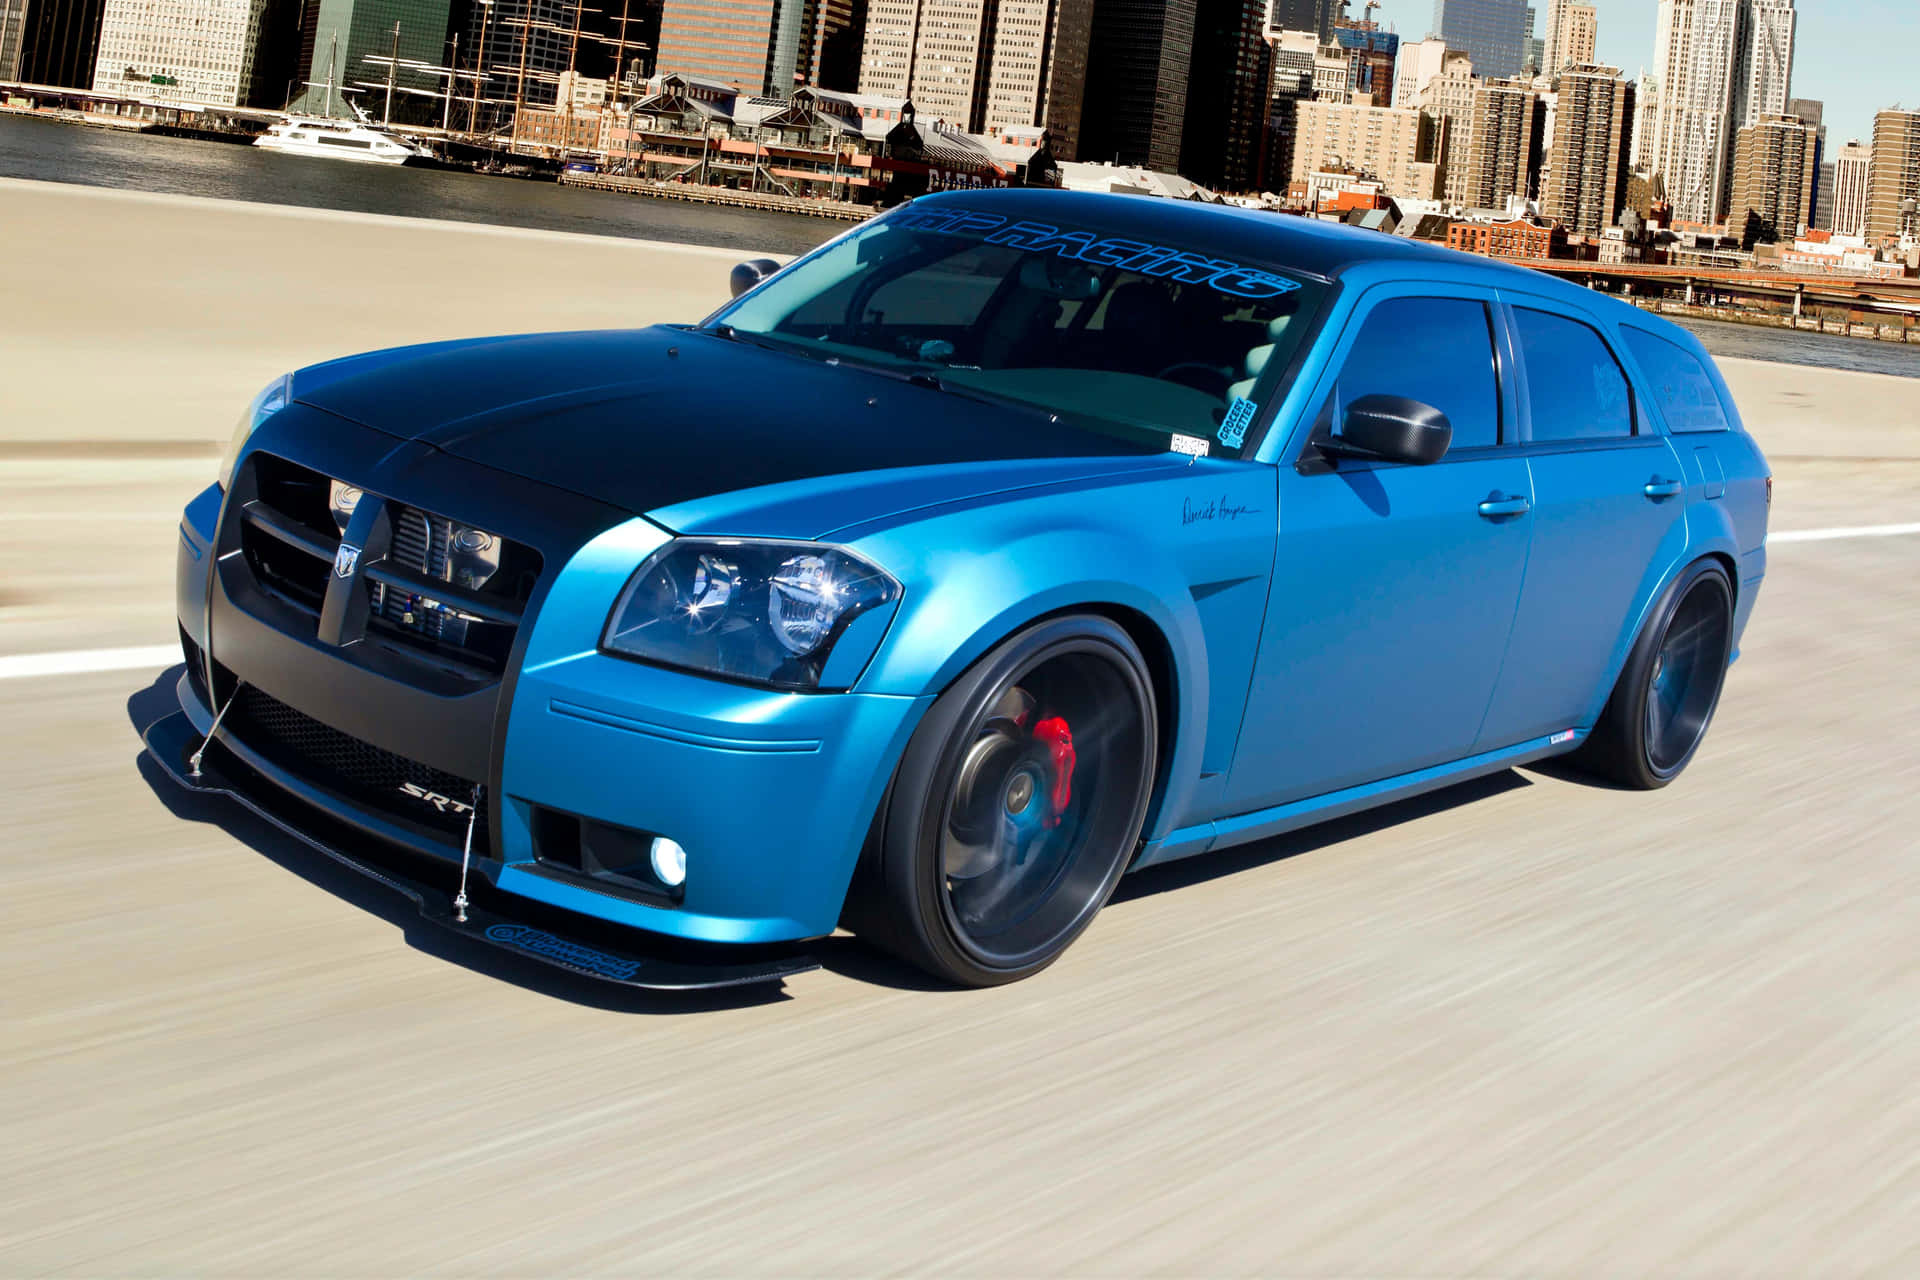 Captivating Display Of Dodge Magnum In Action Wallpaper